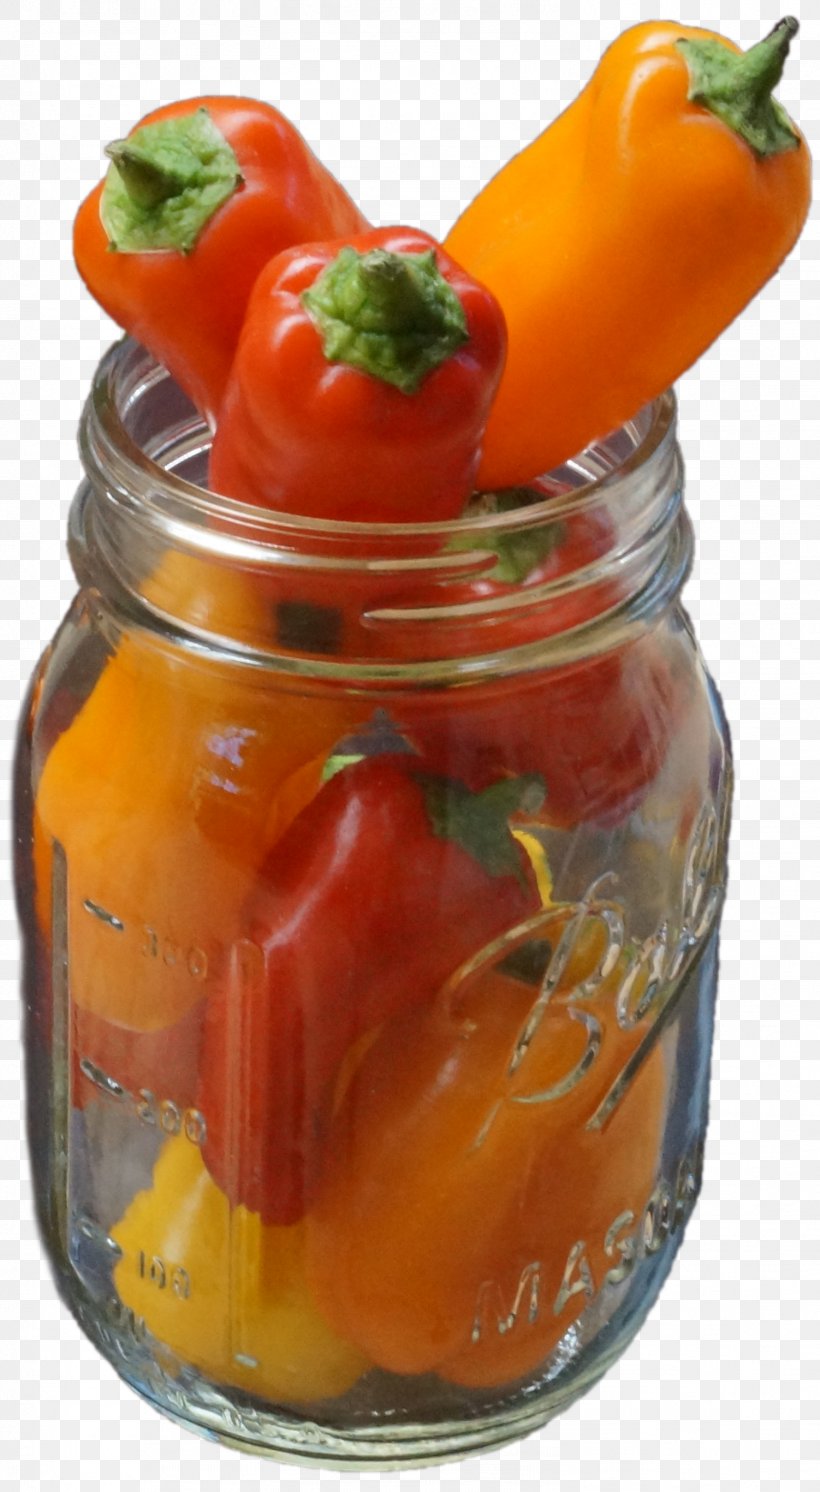 Chili Pepper Vegetarian Cuisine Giardiniera Peperoncino Garnish, PNG, 1502x2733px, Chili Pepper, Bell Peppers And Chili Peppers, Food, Food Preservation, Garnish Download Free